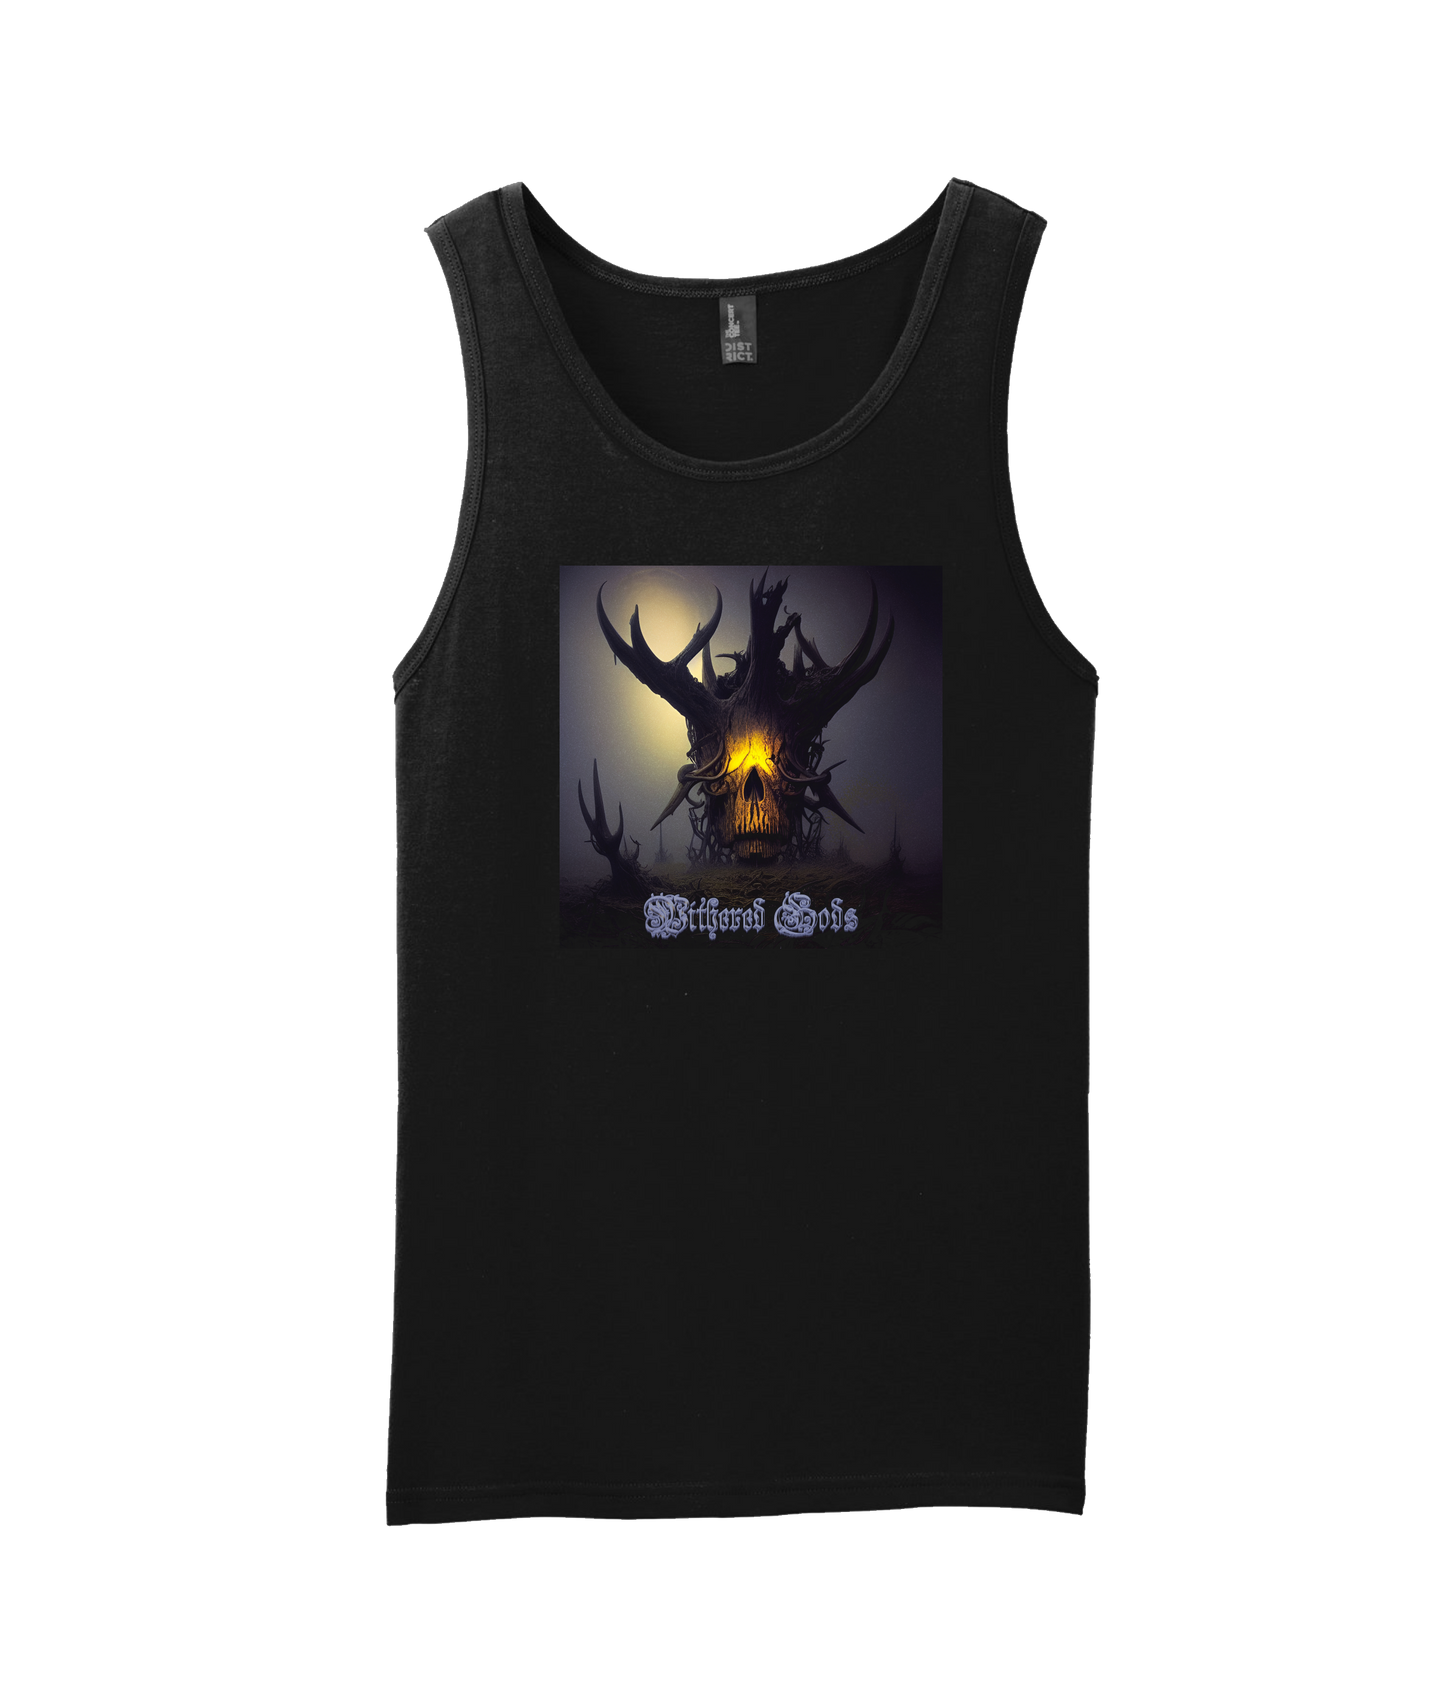 Withered Gods - Death Rattle - Black Tank Top